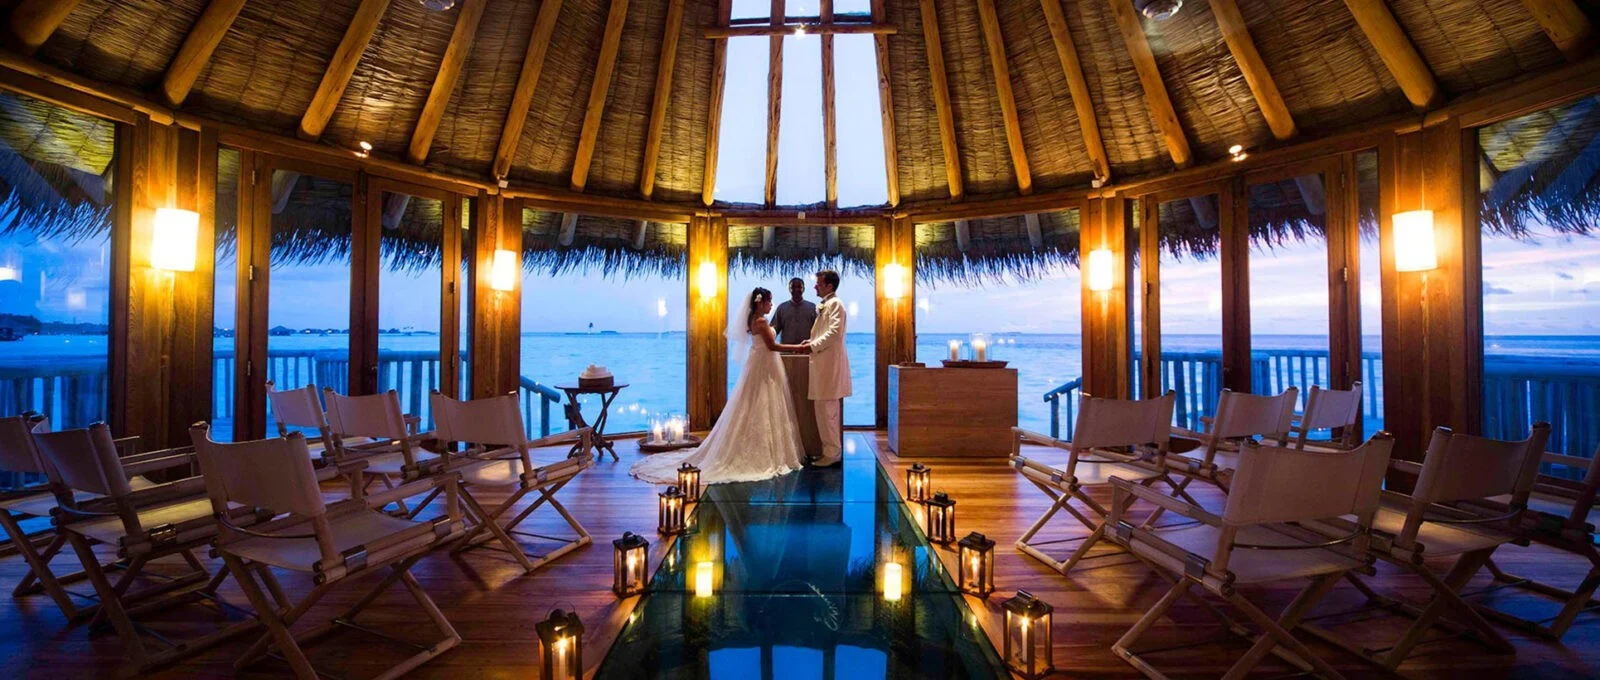 Secret Wedding Experience – The Most Luxury And Intimate Way For Couples To Say “I Do” In The Maldives